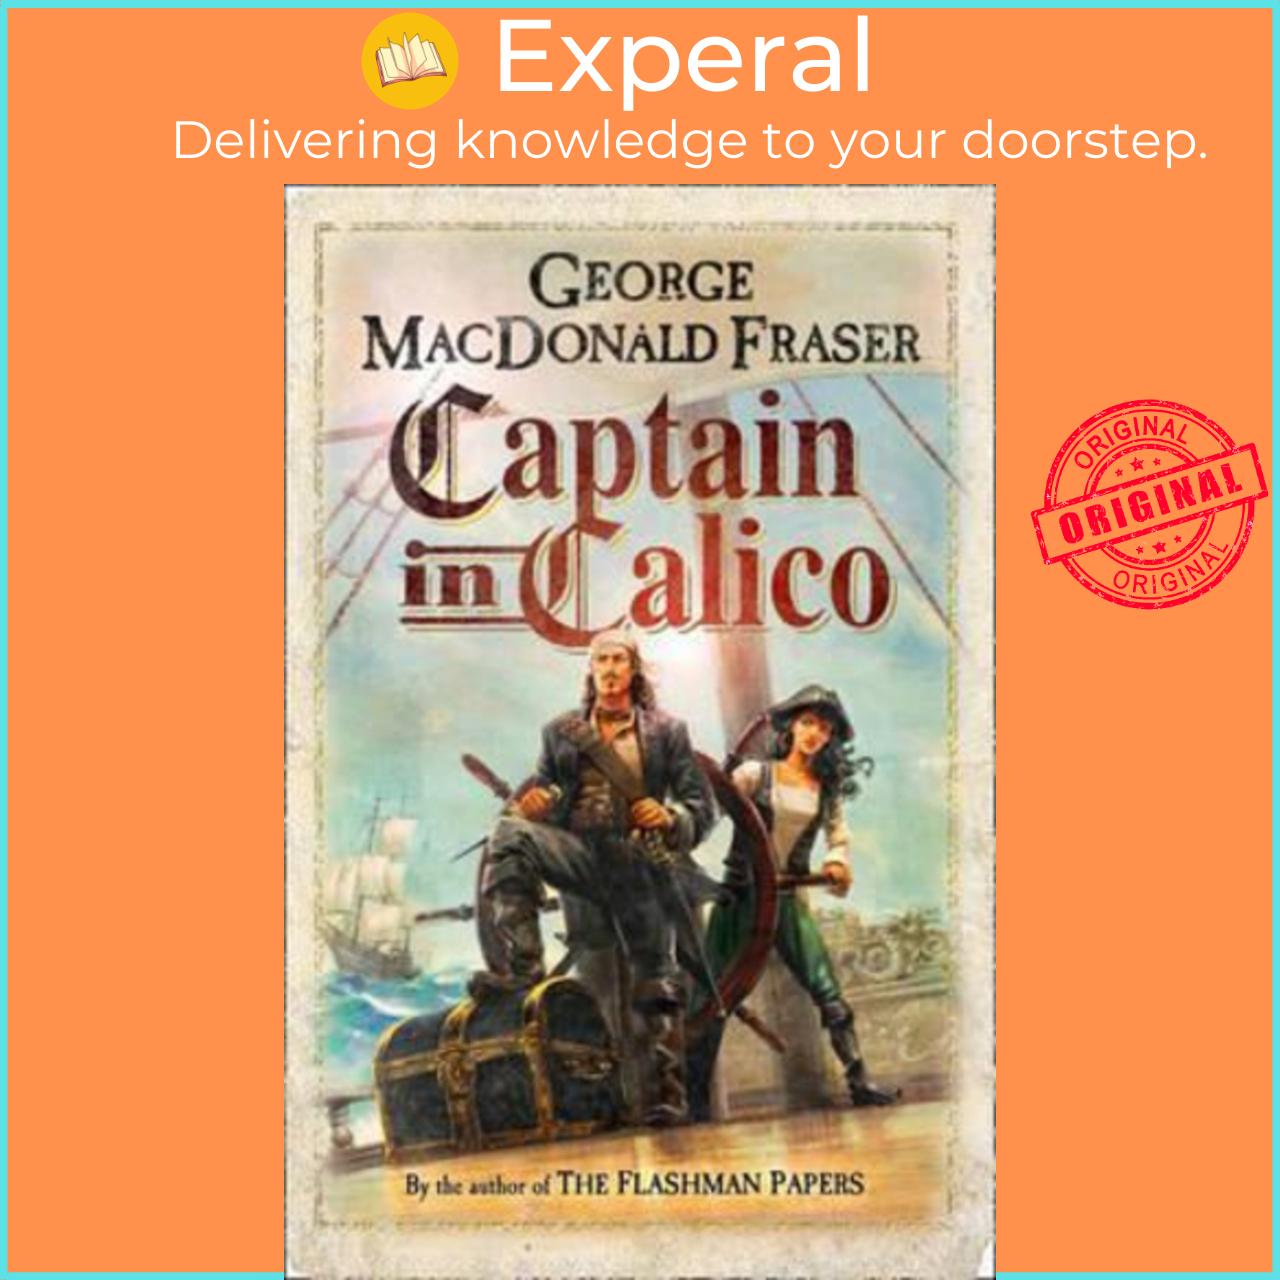 Sách - Captain in Calico by George Macdonald Fraser (UK edition, hardcover)